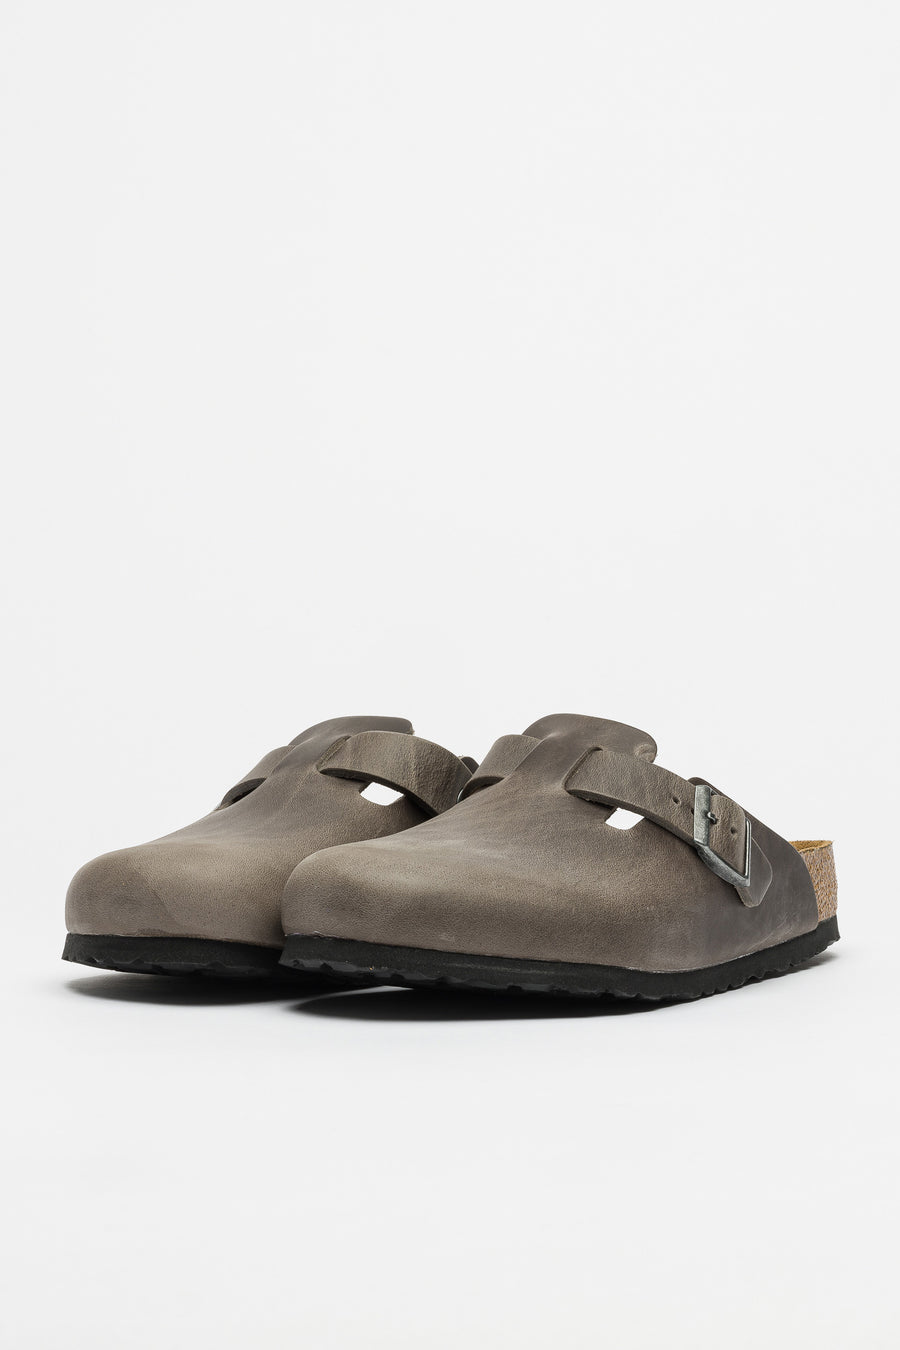 birkenstock boston soft footbed iron oiled leather